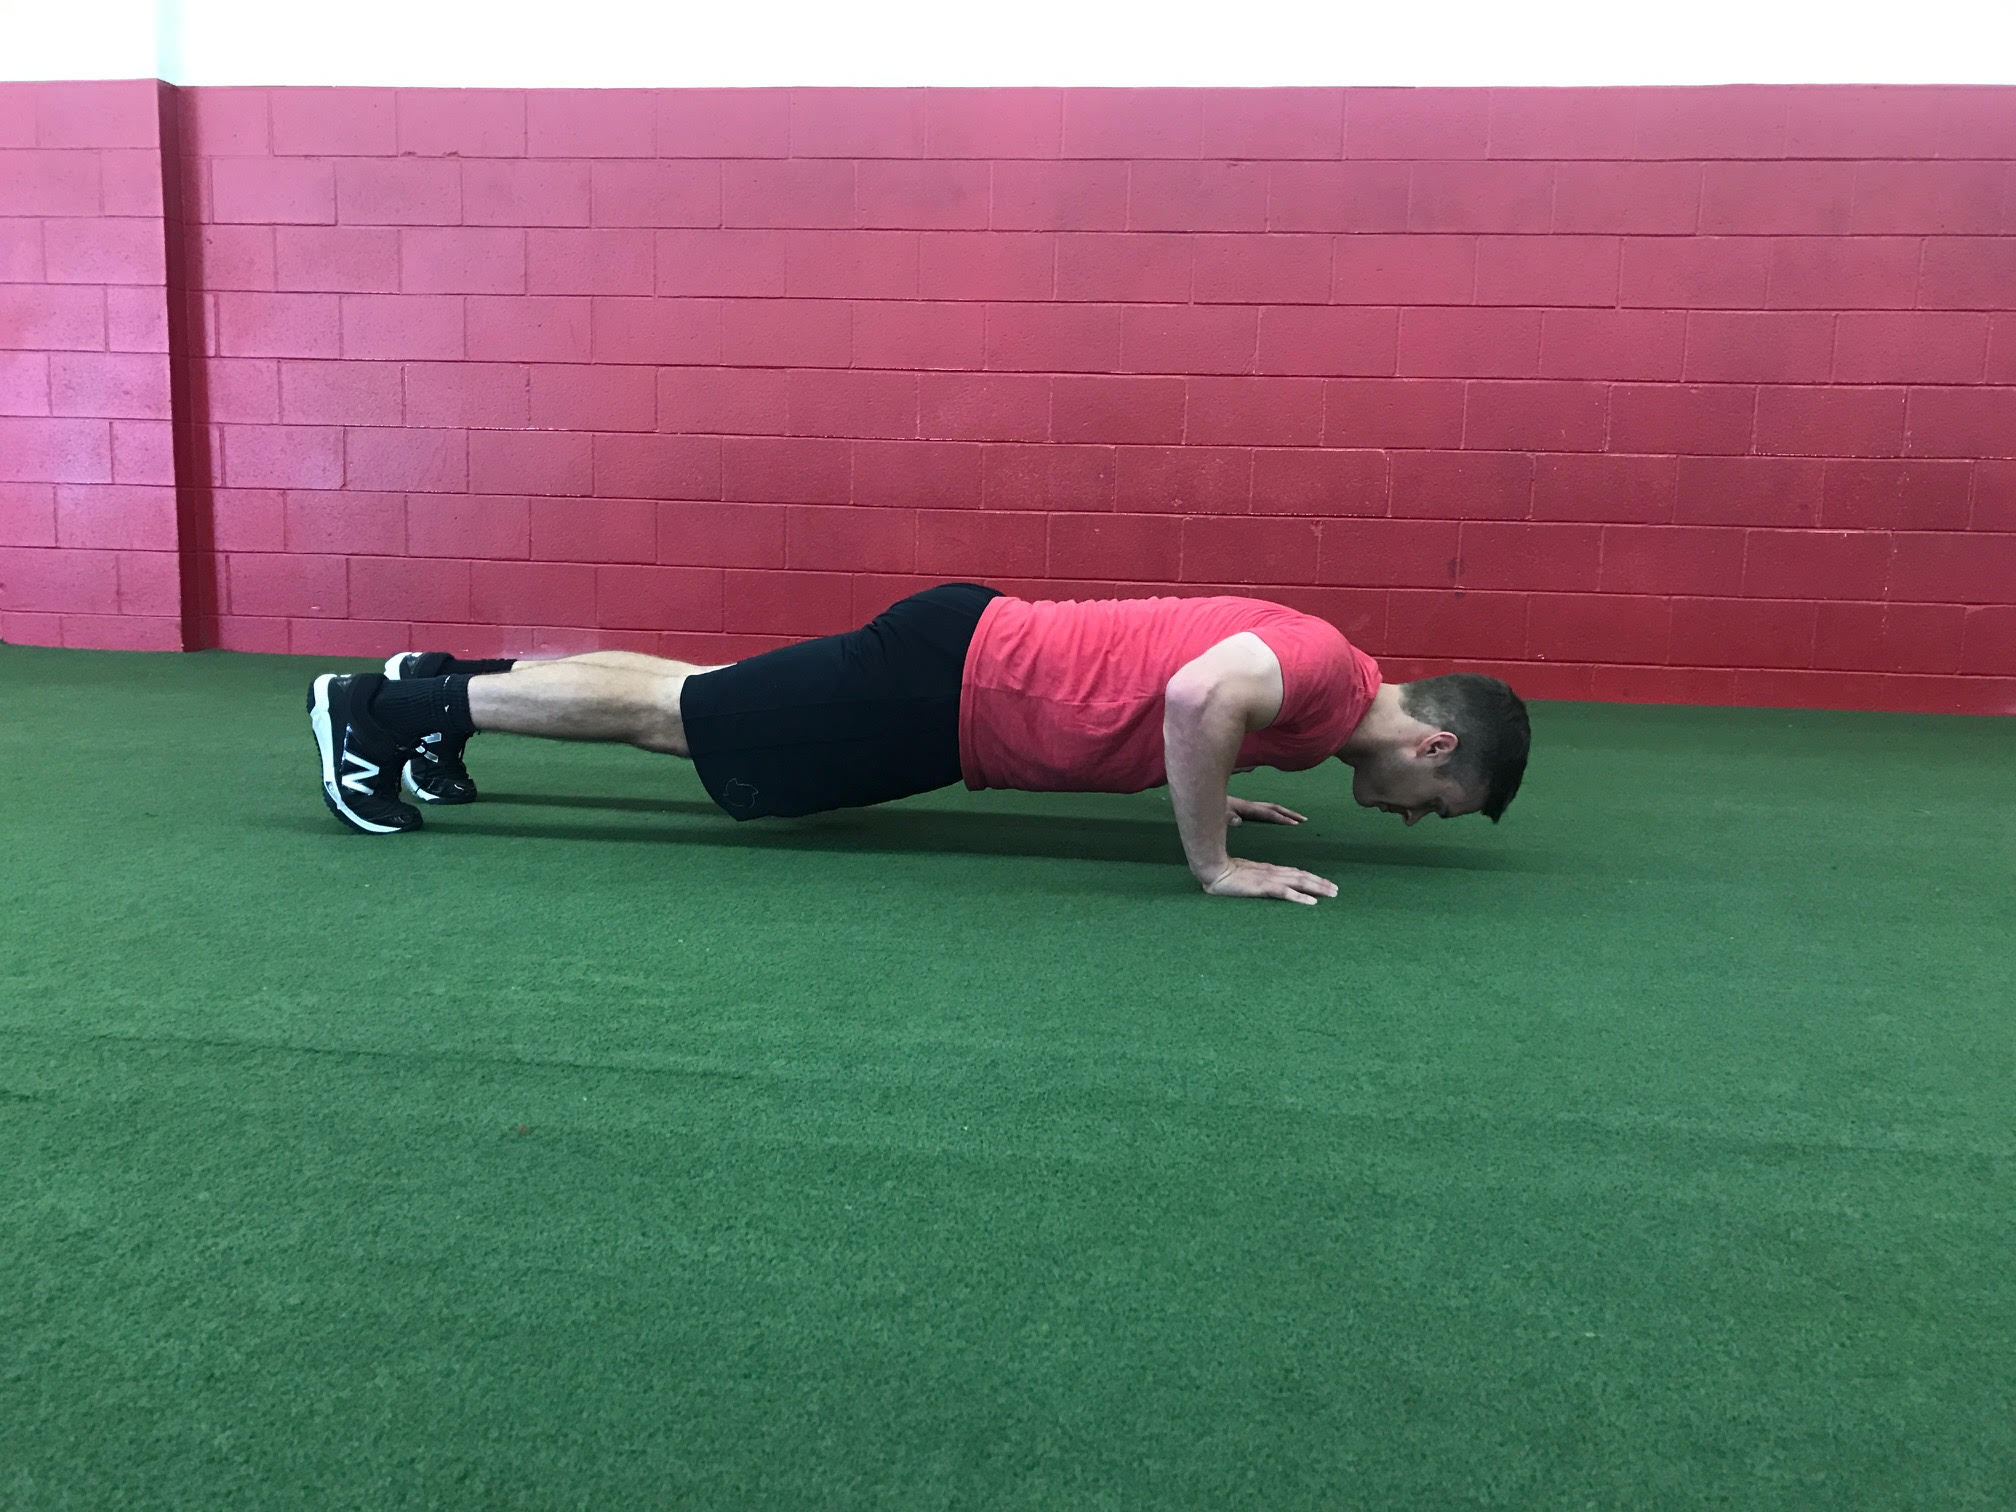 right posture for push ups